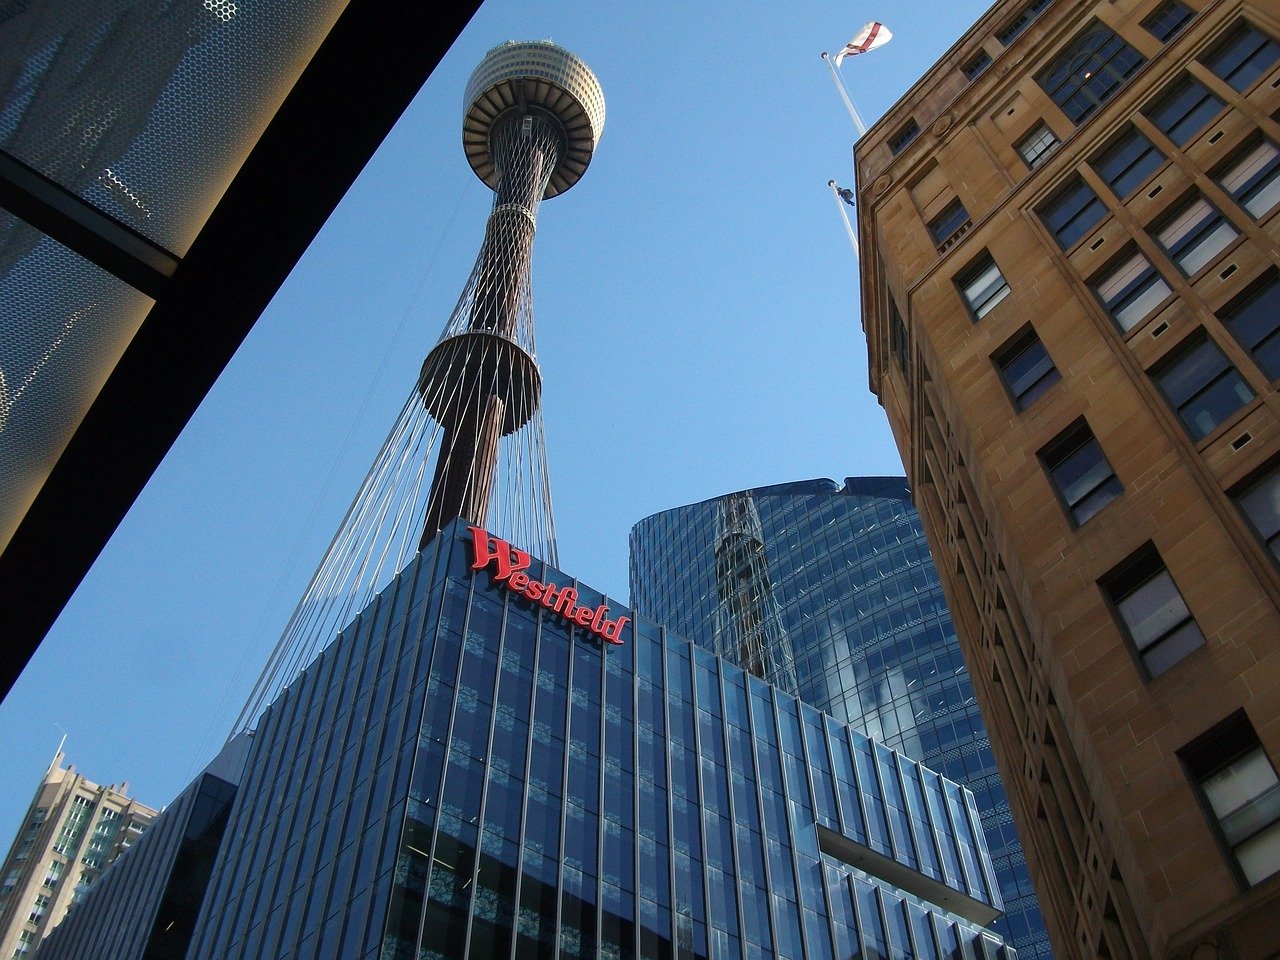 sydney tower westfield shopping mall